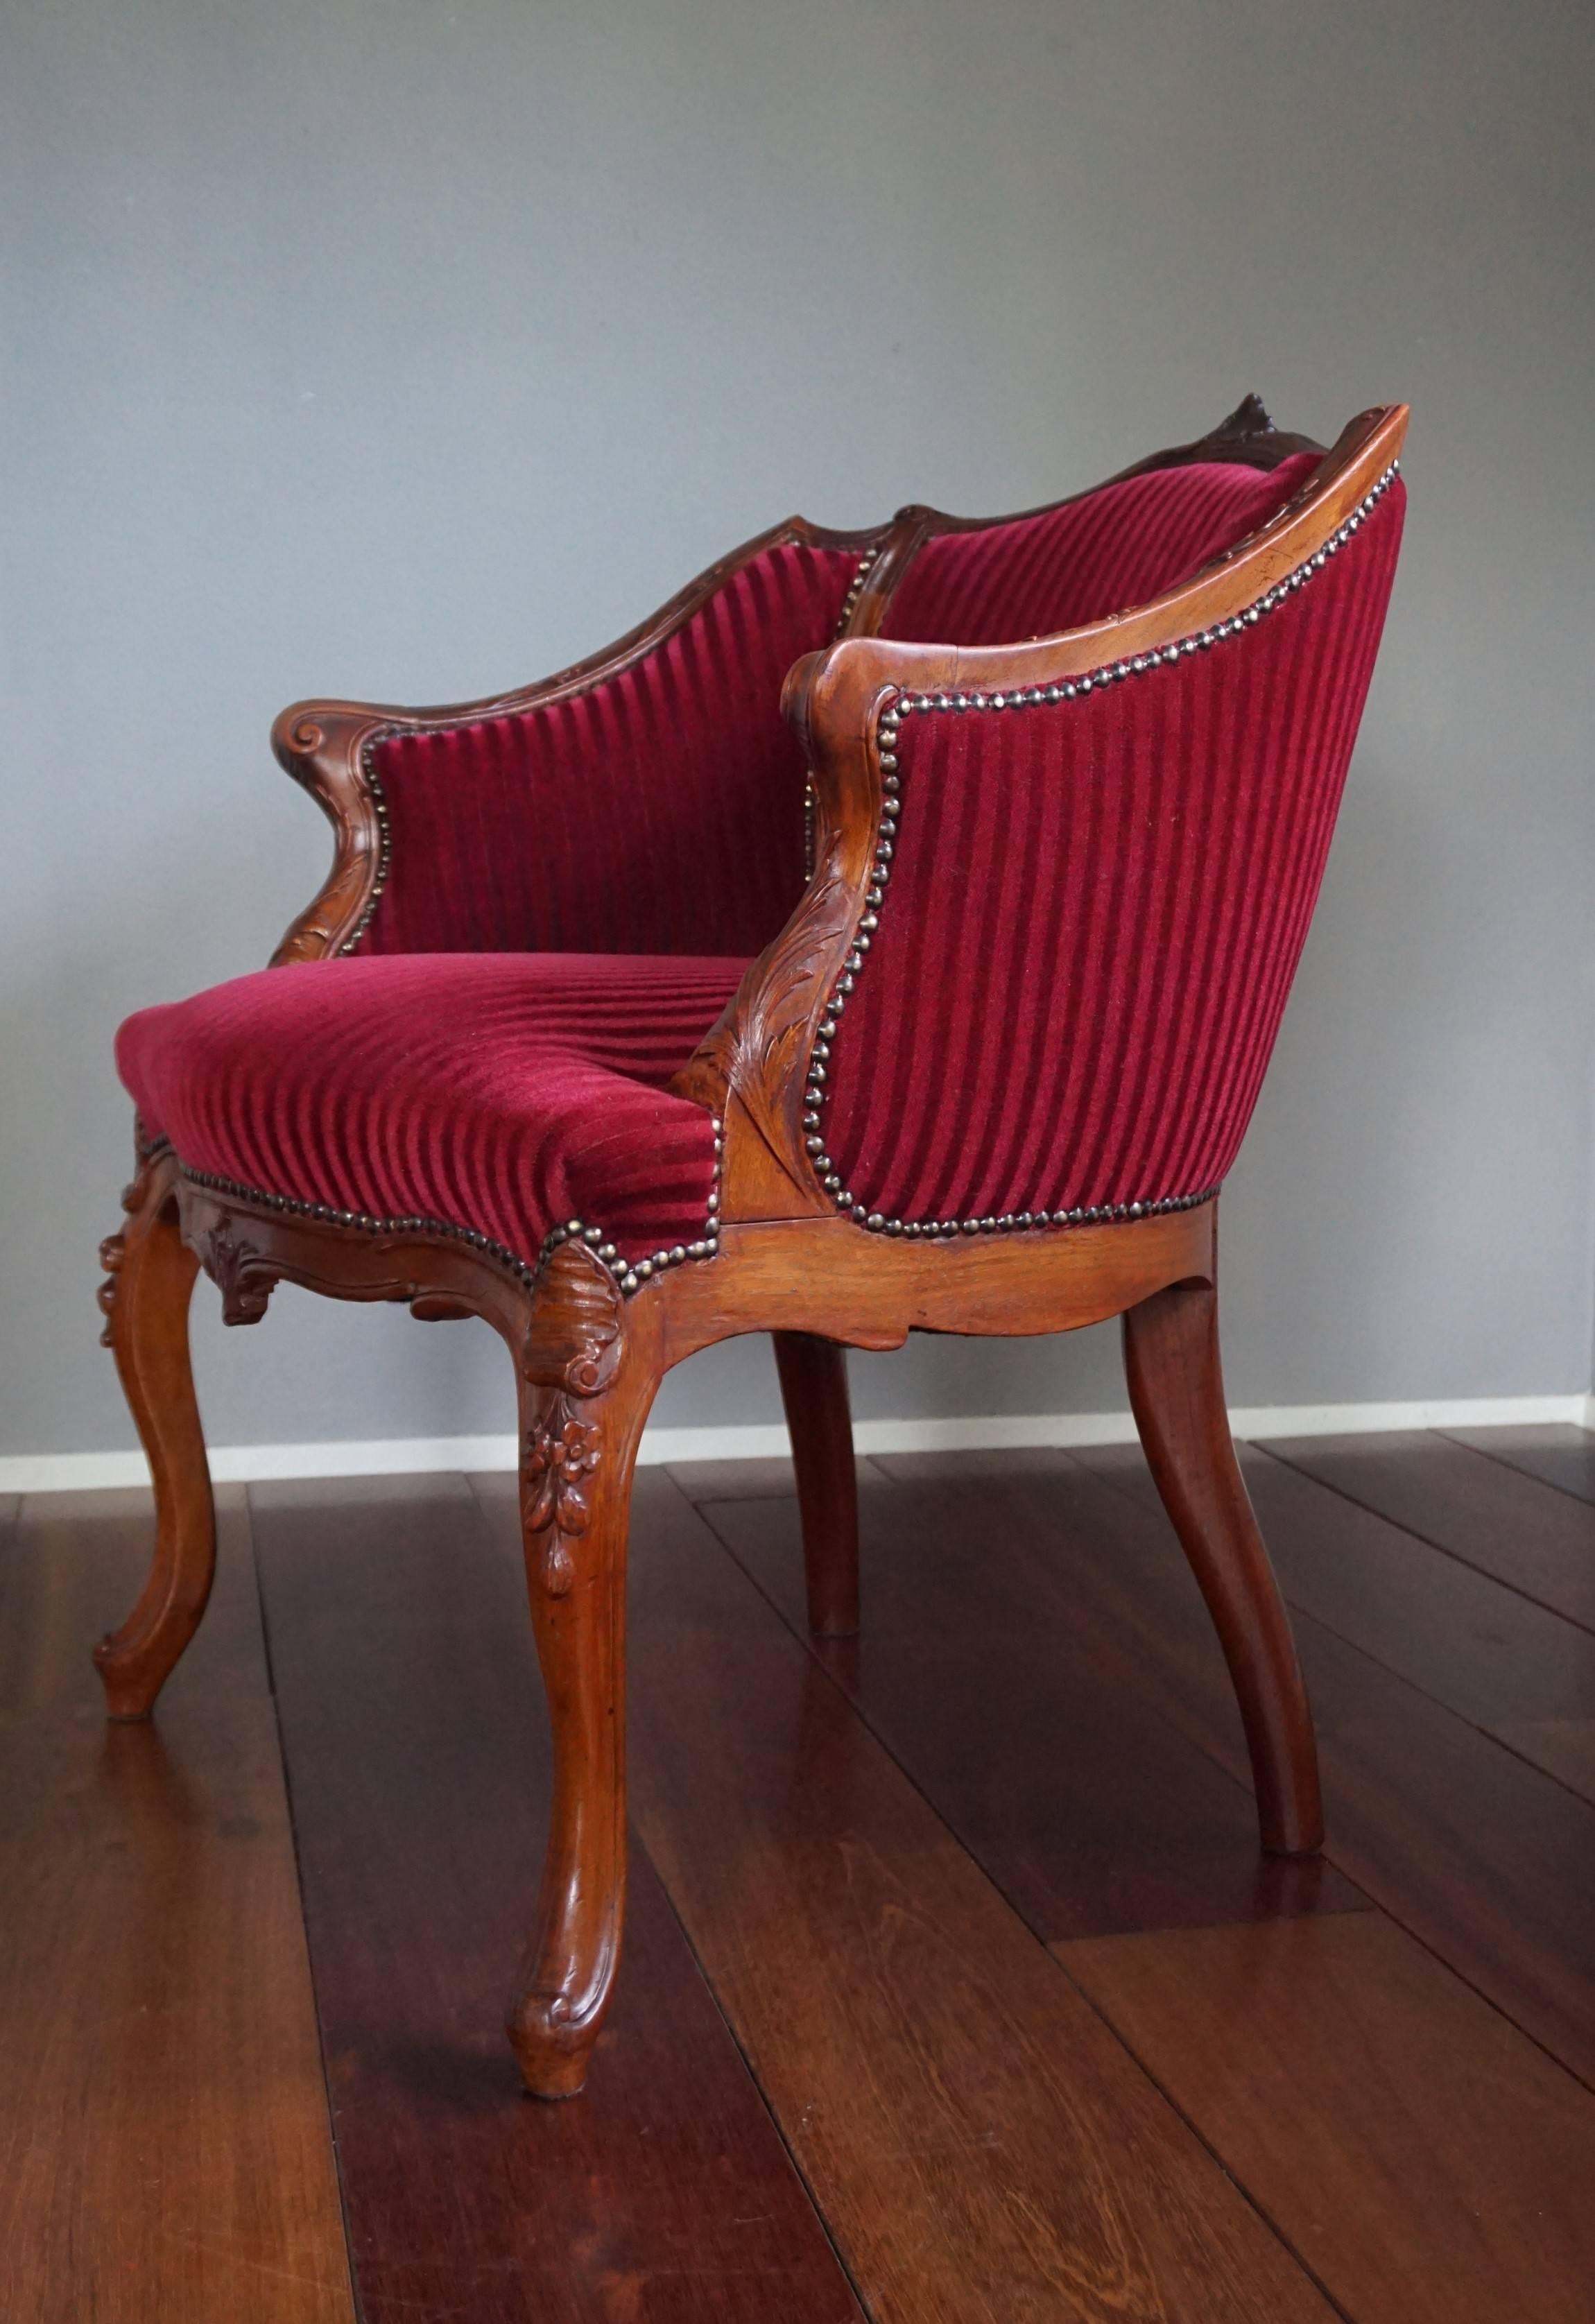 Wonderful design, top quality and highly decorative chair.

If you are looking for rare, stylish and top-quality furniture to decorate your (new) home then this wonderful 19th century chair could be perfect for you. When you have a place for it then